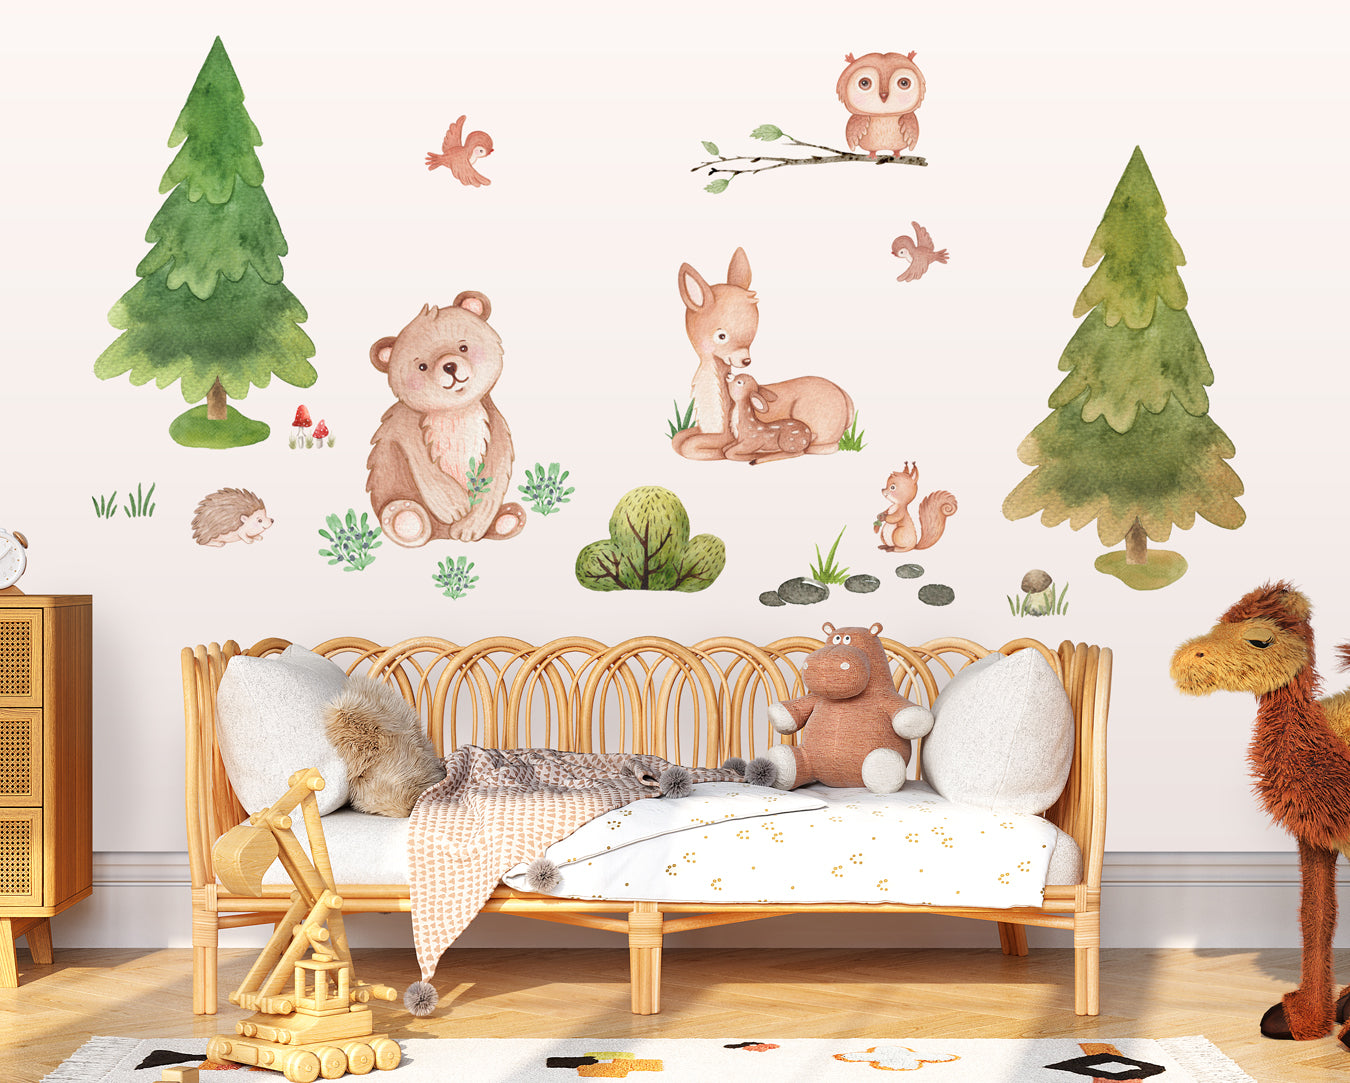 Animal Forest Trees Nursery Wall Decal Sticker